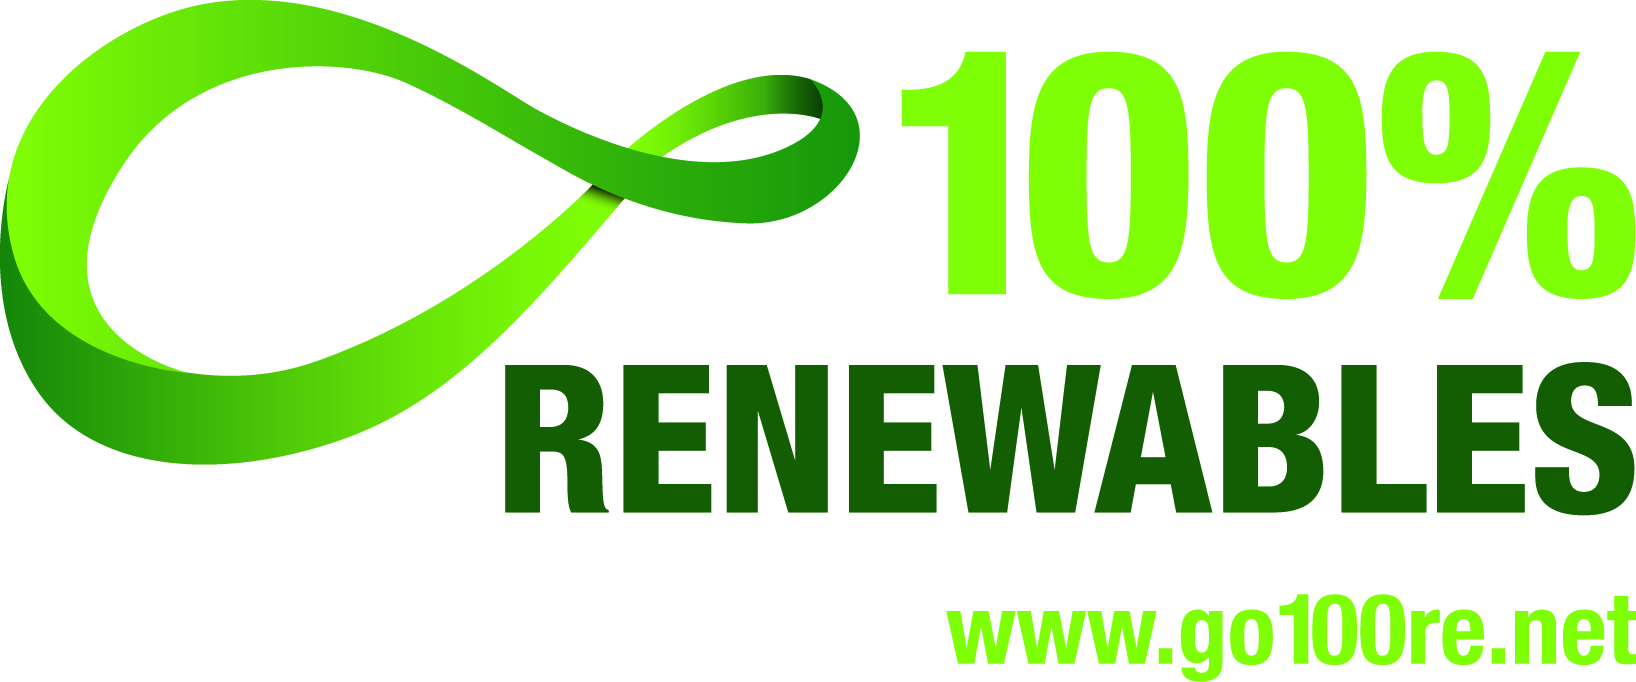 The Global 100% Renewable Energy Campaign